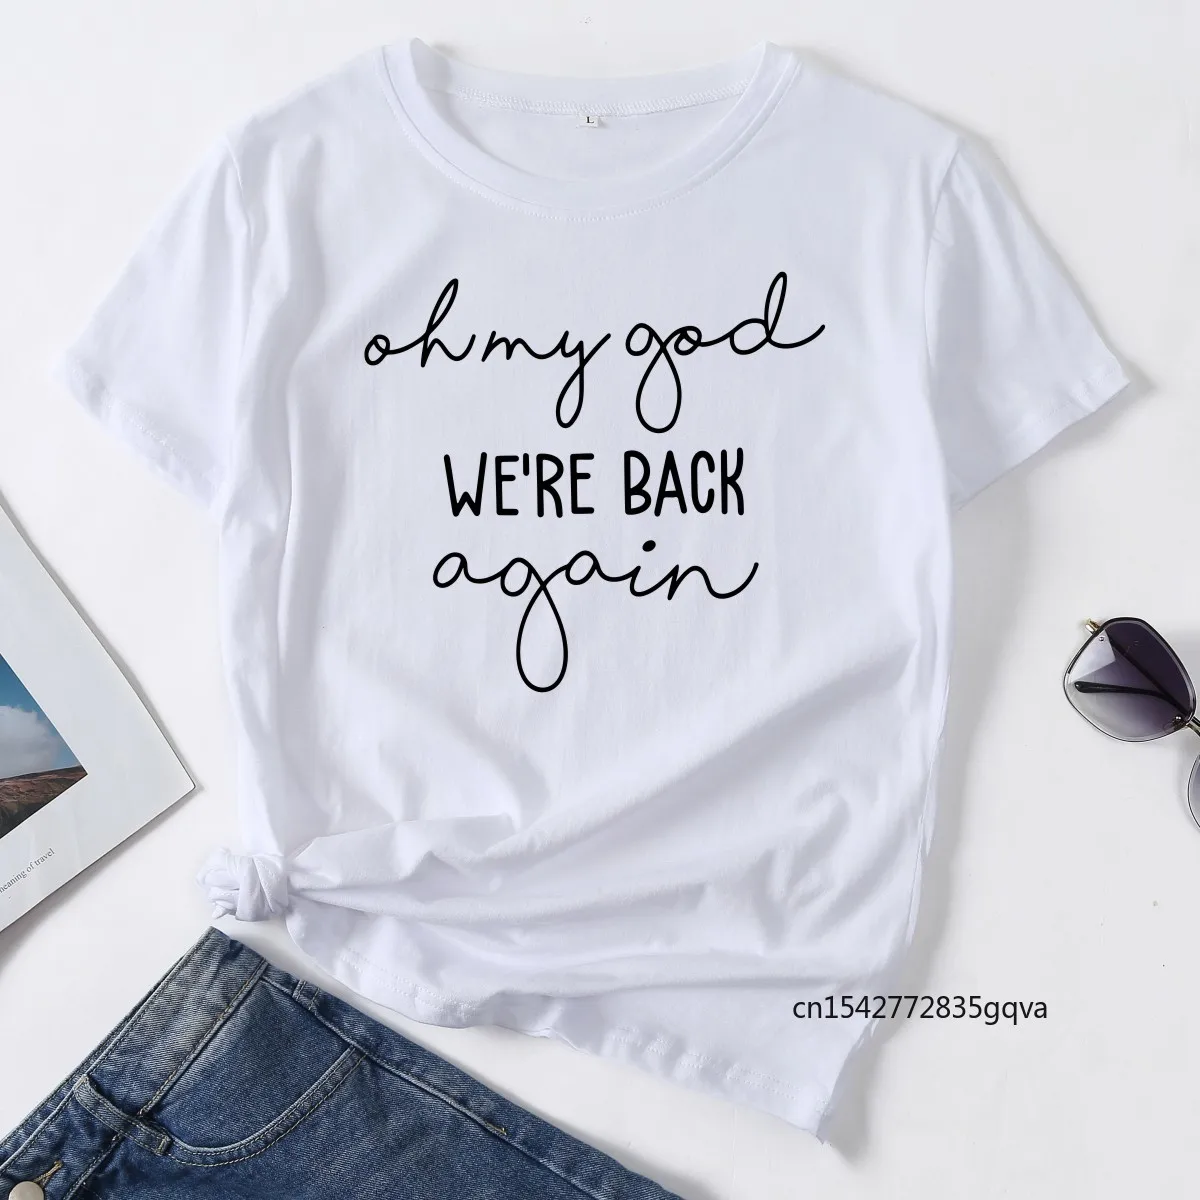 

Oh My God We're Back Again Woman T-Shirt Short Sleeve T-Shirts Summer Tops for Women Graphic Tee Female Shirt Clothes